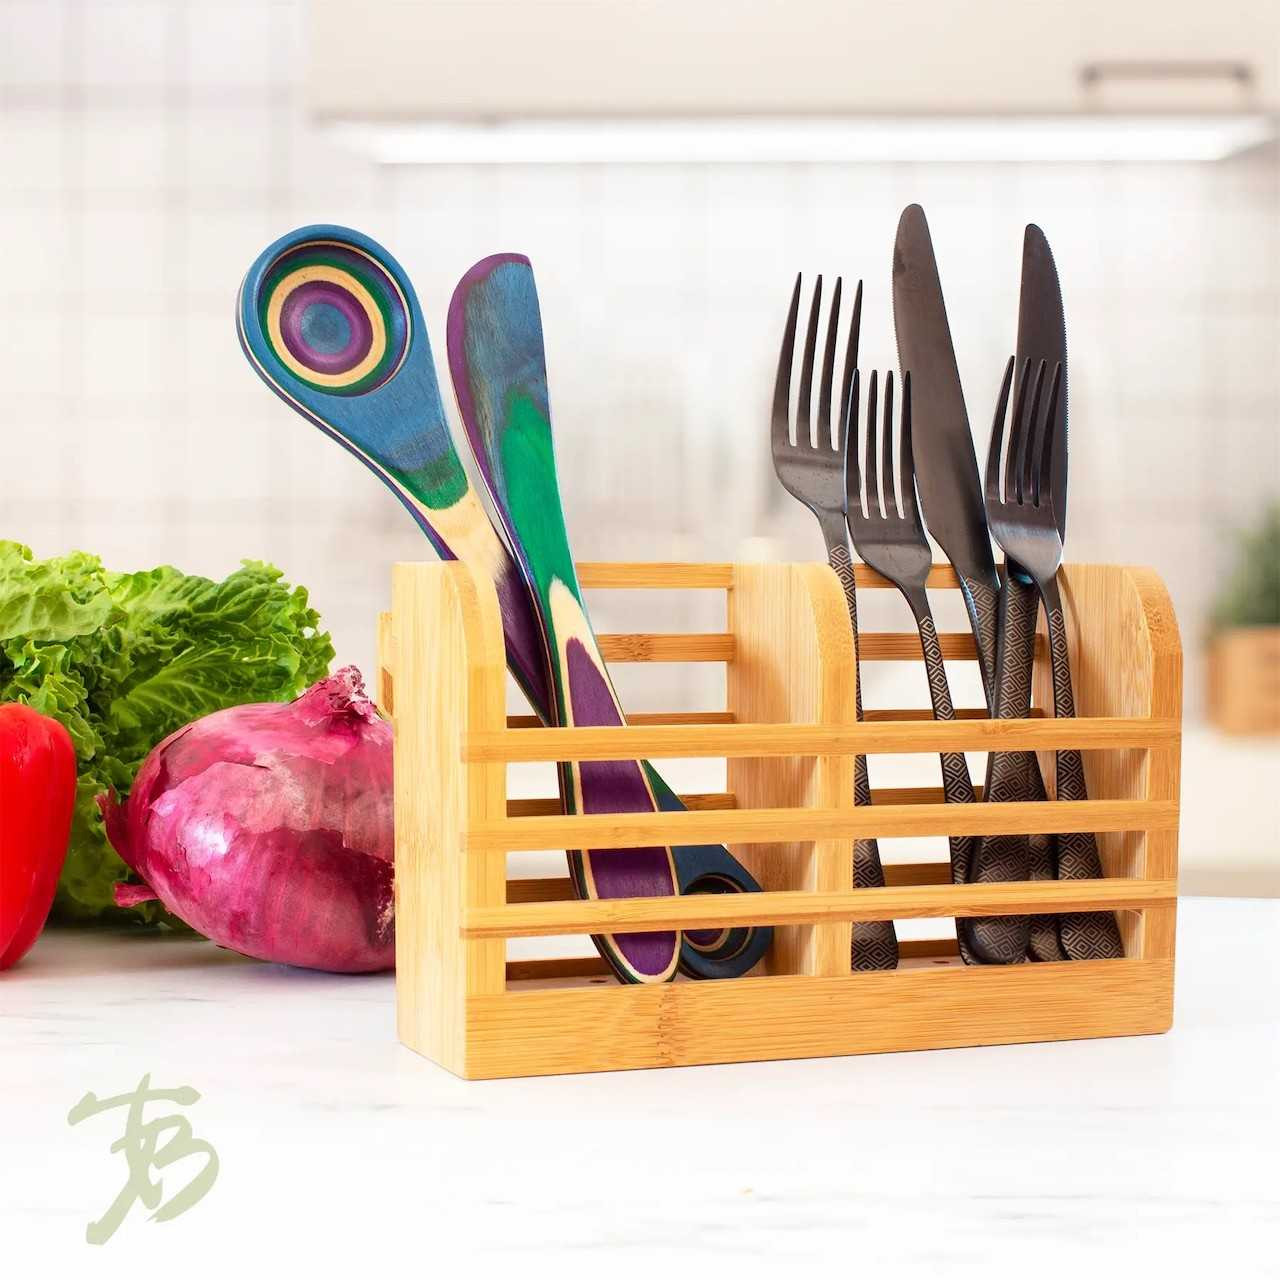 https://cdn11.bigcommerce.com/s-36vh87glm0/images/stencil/1280x1280/products/16692/36895/Totally-Bamboo-Dish-Rack-Utensil-Holder_25618__23646.1696973543.jpg?c=1?imbypass=on